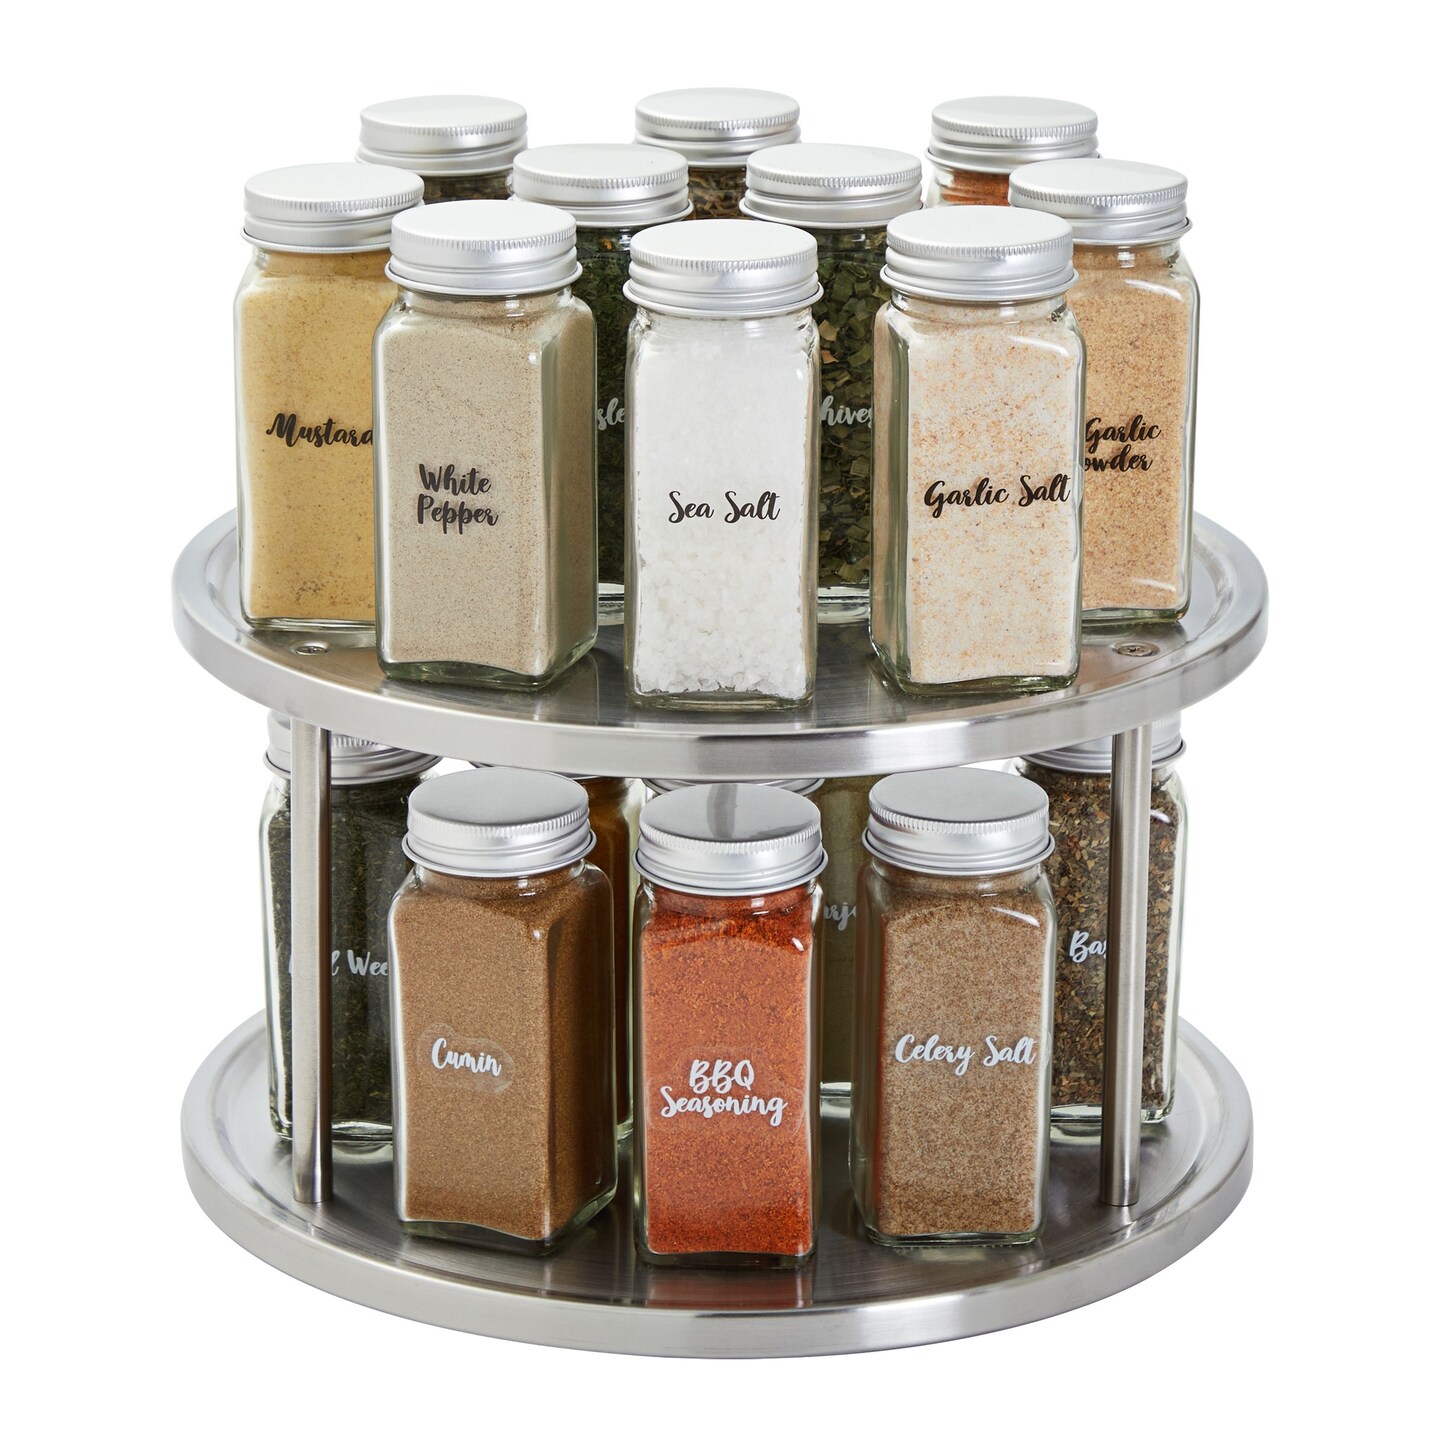 Made Easy Kit Seasoning and Spice Jar Rack Organizer - Metal and Wood Functional Art Decor Sculpture - Kitchen Countertop